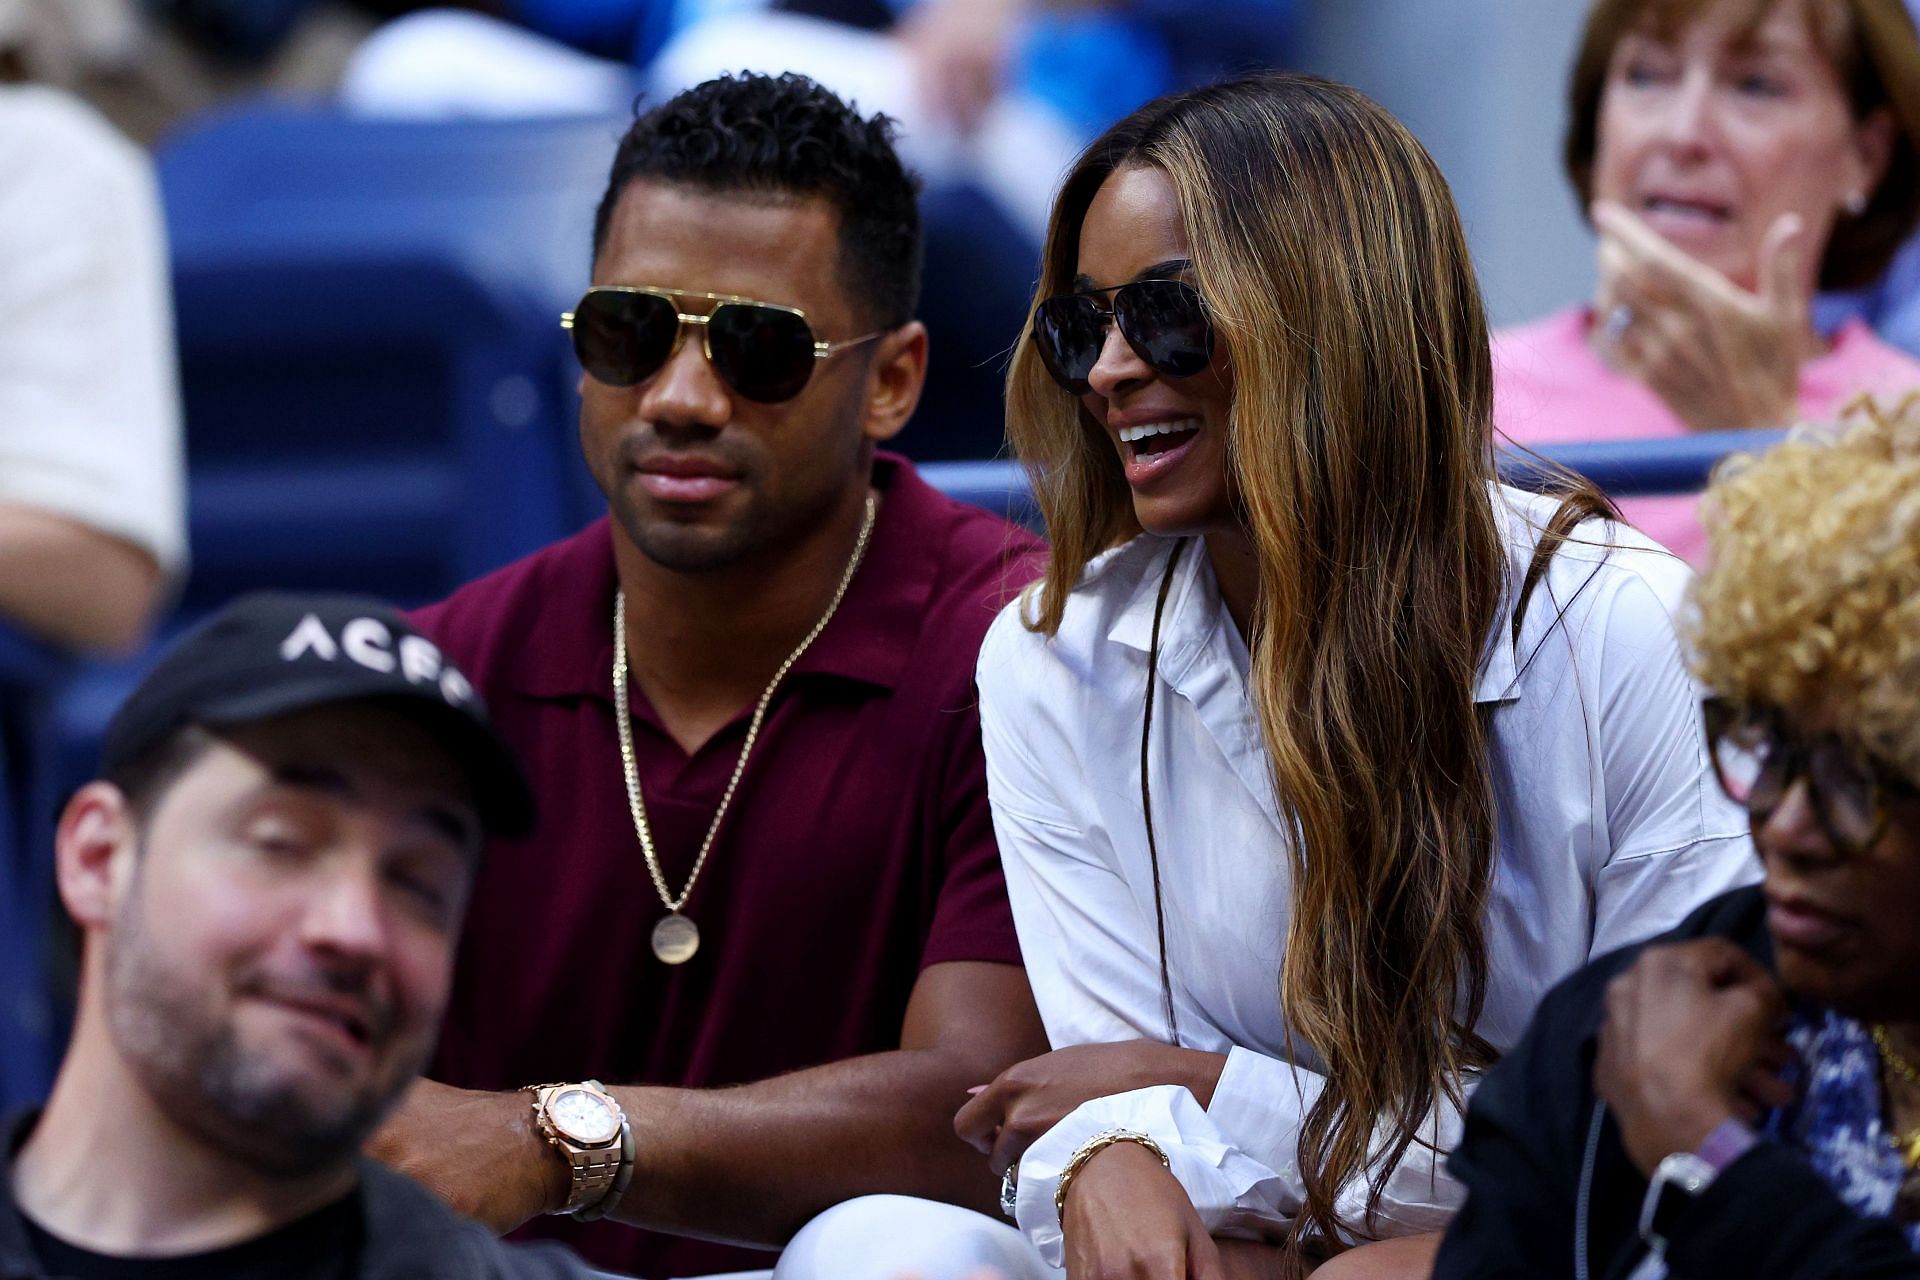 Ciara and Wilson attending the U.S. Open in 2022